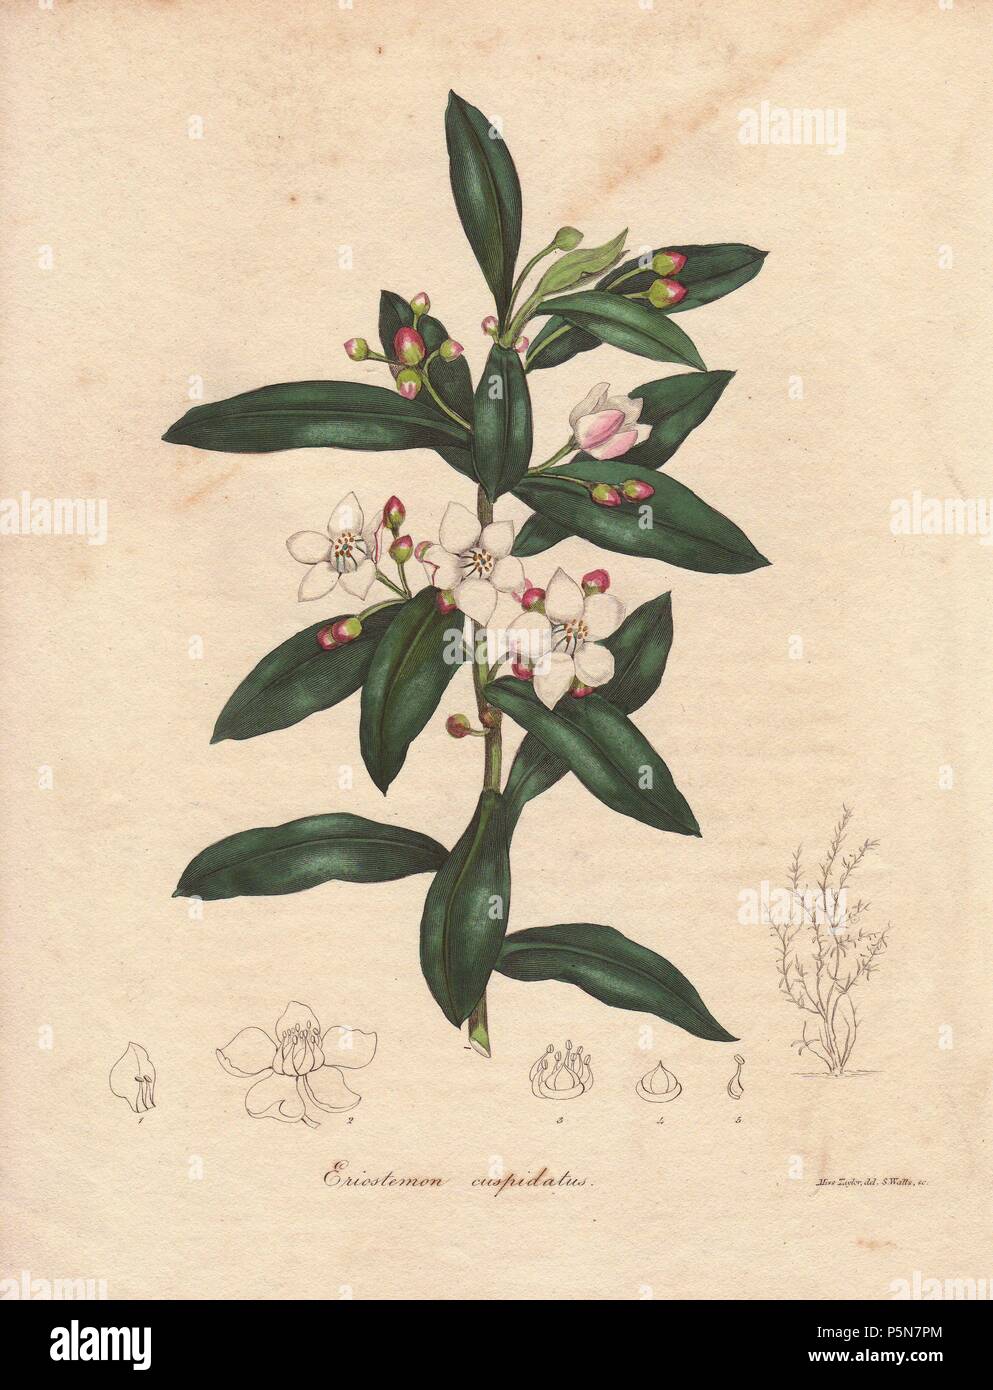 Eriostemon cuspidatum. . White flowered eriostemon cuspidatum from Australia.. . Benjamin Maund's The Botanist was a five-volume series that introduced 250 new plants from 1836 to 1842. The series is notable for its many female artists: the plates were drawn by Maund's daughters Sarah and Eliza, Augusta Withers, Priscilla Bury, Jane Taylor, Miss R. Mills among others. The other characteristic is partial colouring - many of the finely detailed copperplate engravings are left with part of the flower and leaves uncoloured. Stock Photo